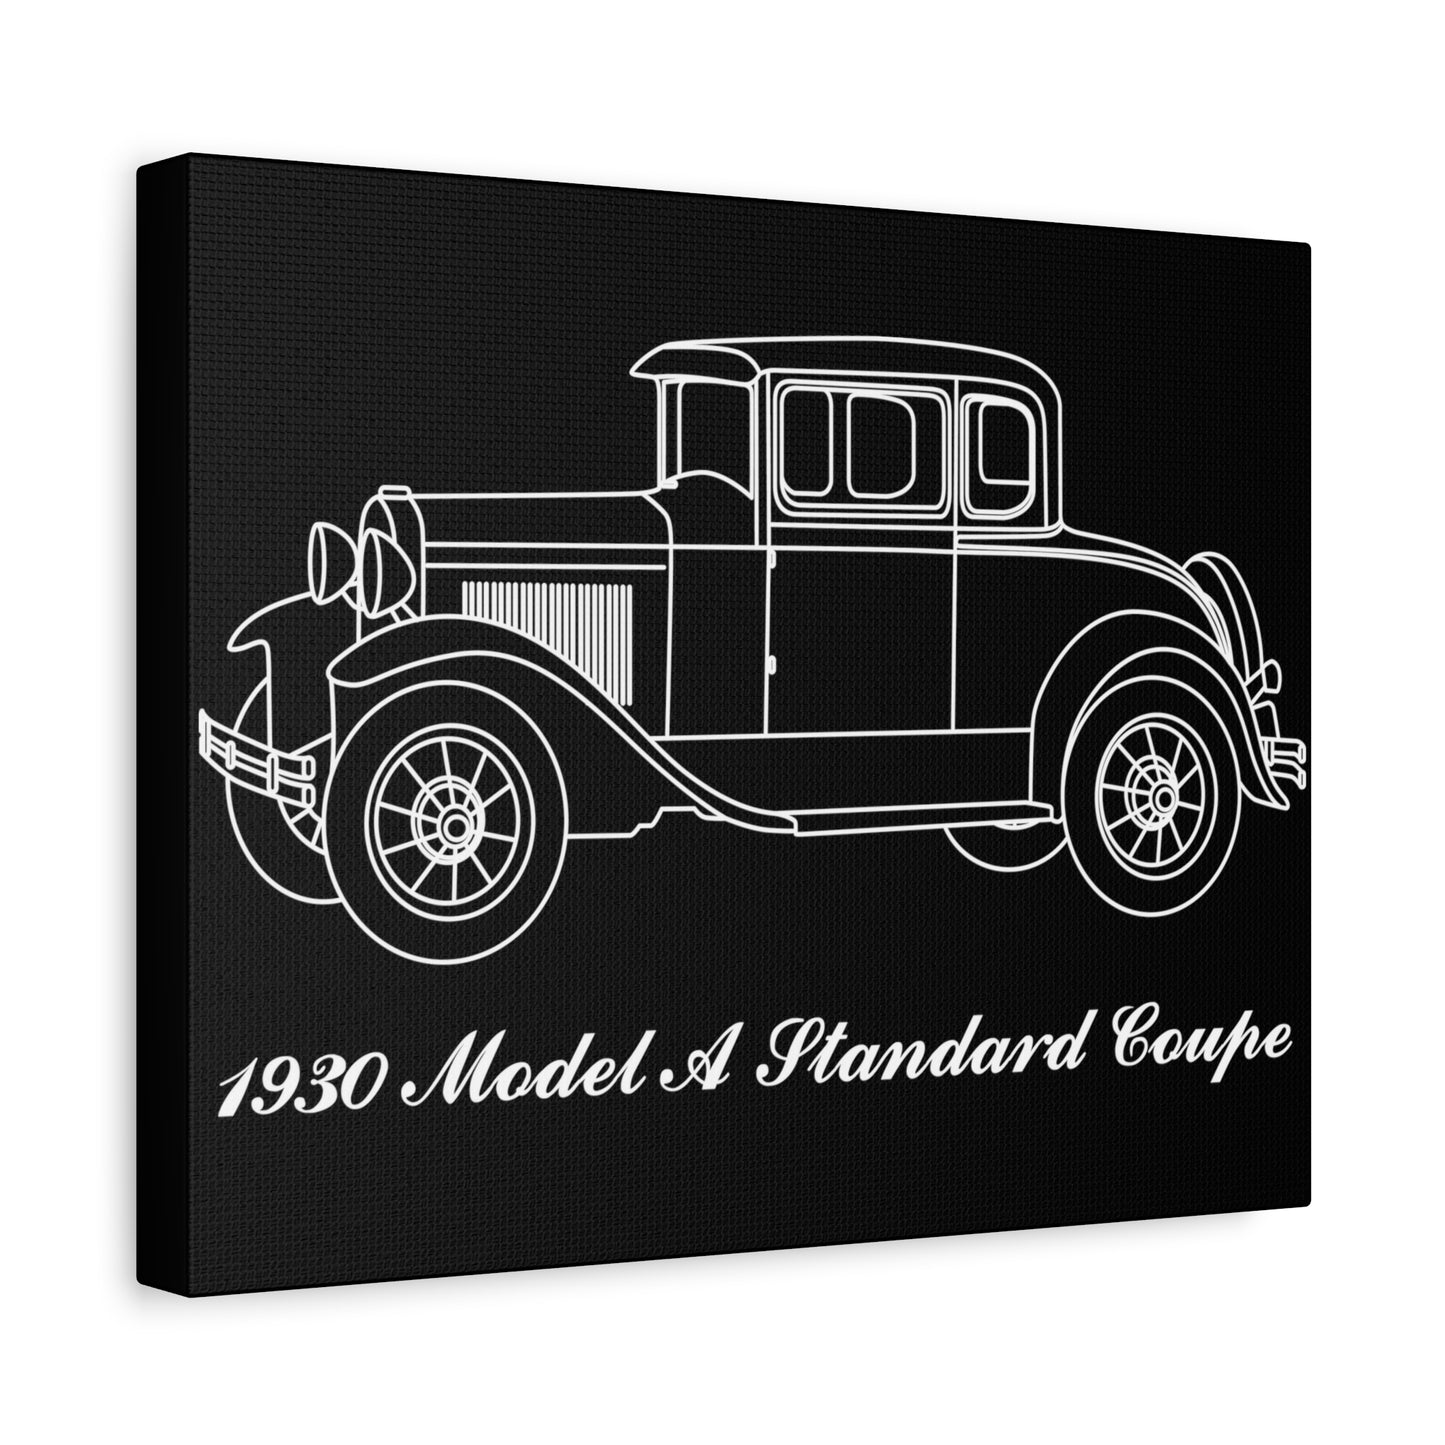 1930 Standard Coupe Black Canvas Wall Art